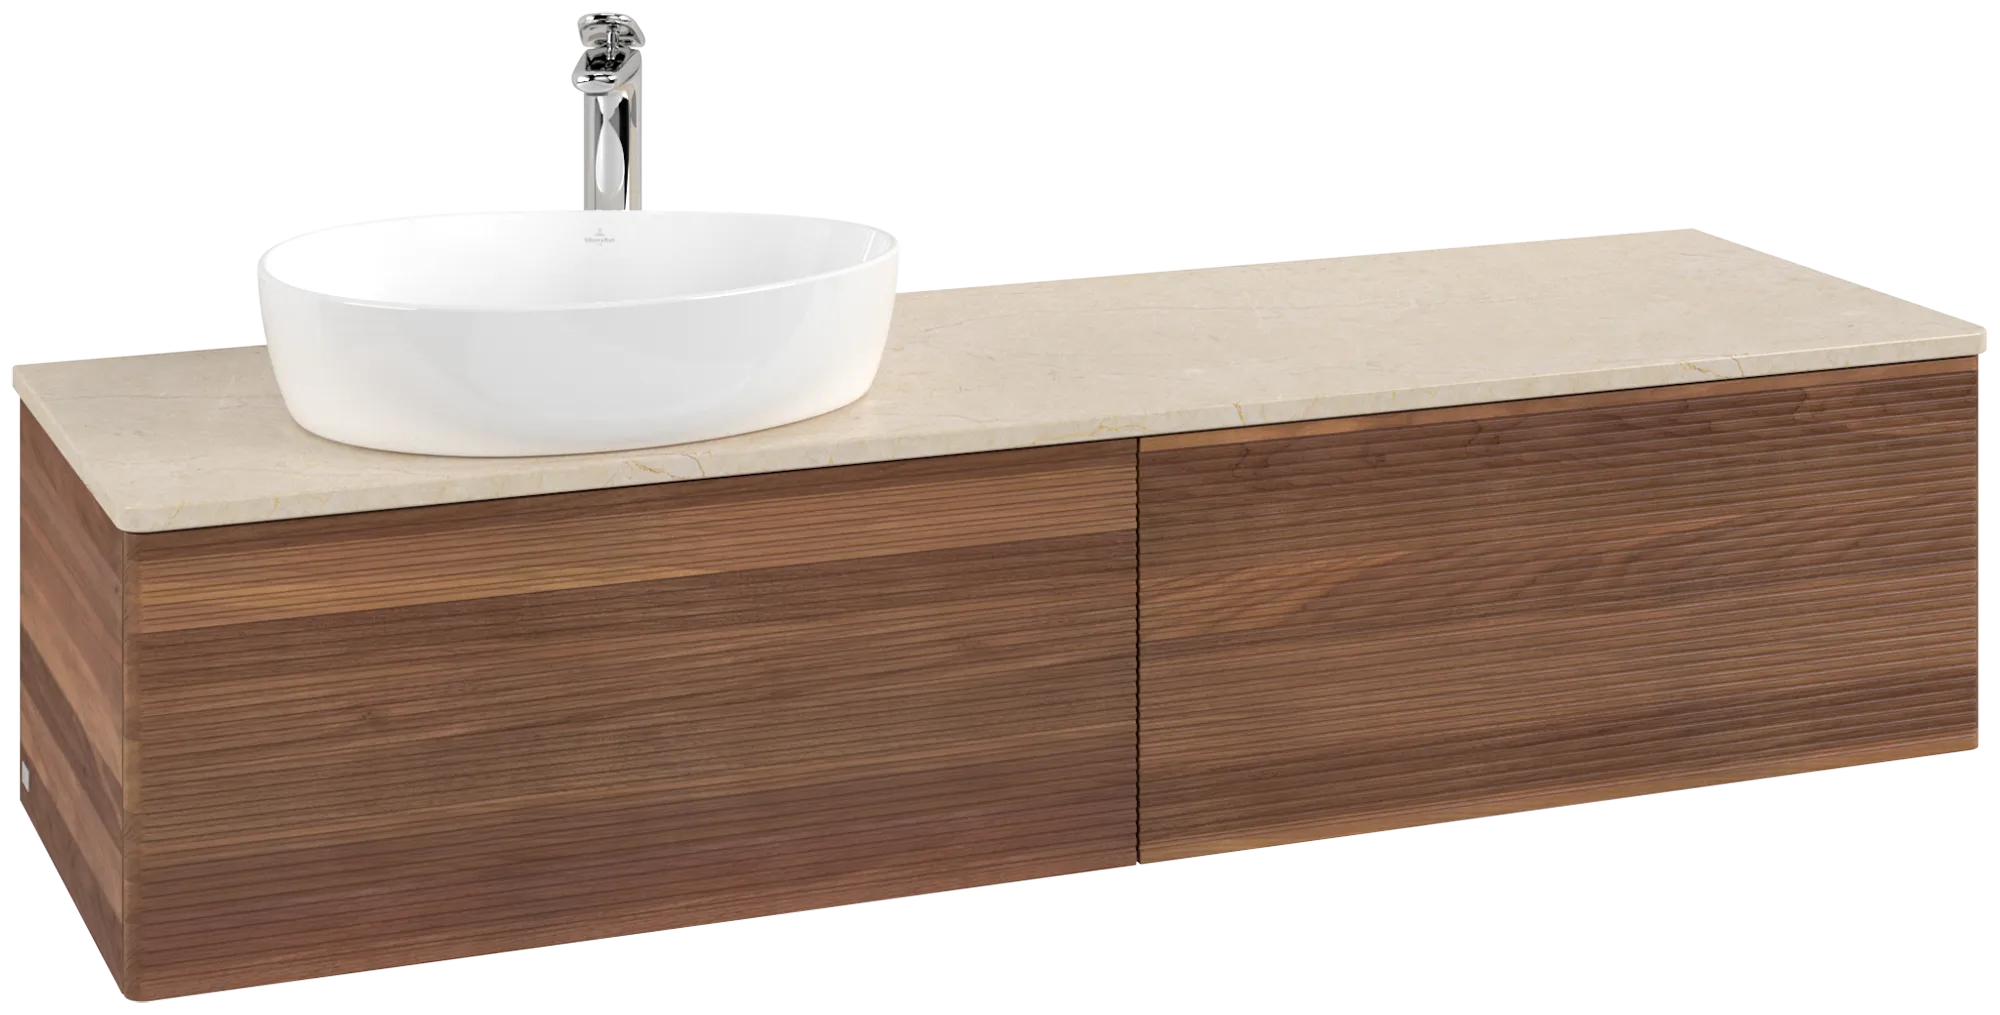 Picture of VILLEROY BOCH Antao Vanity unit, 2 pull-out compartments, 1600 x 360 x 500 mm, Front with grain texture, Warm Walnut / Botticino #K37153HM